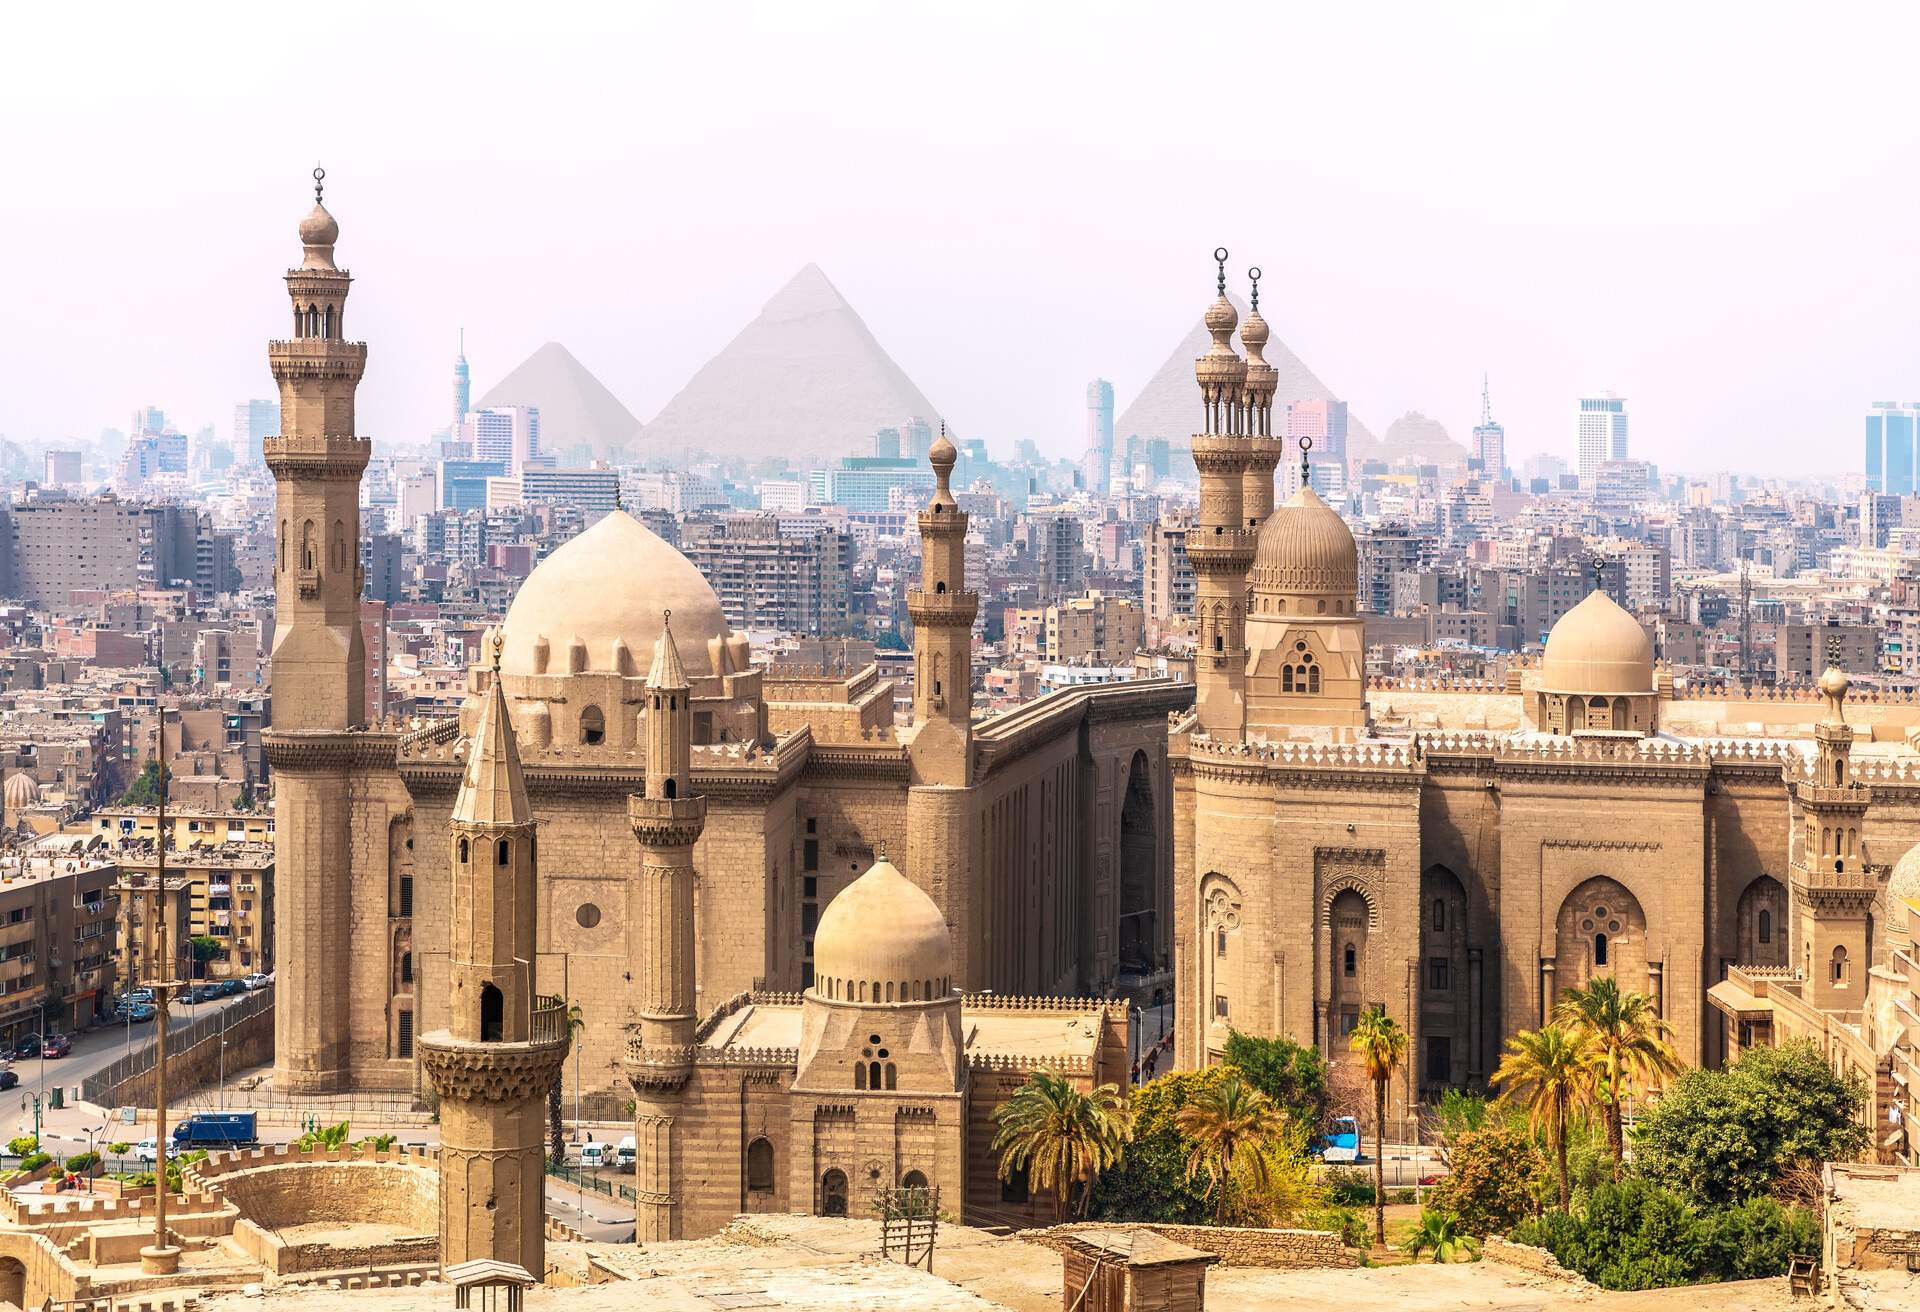 View of mosque in Cairo with Giza Pyramids in background, Egypt